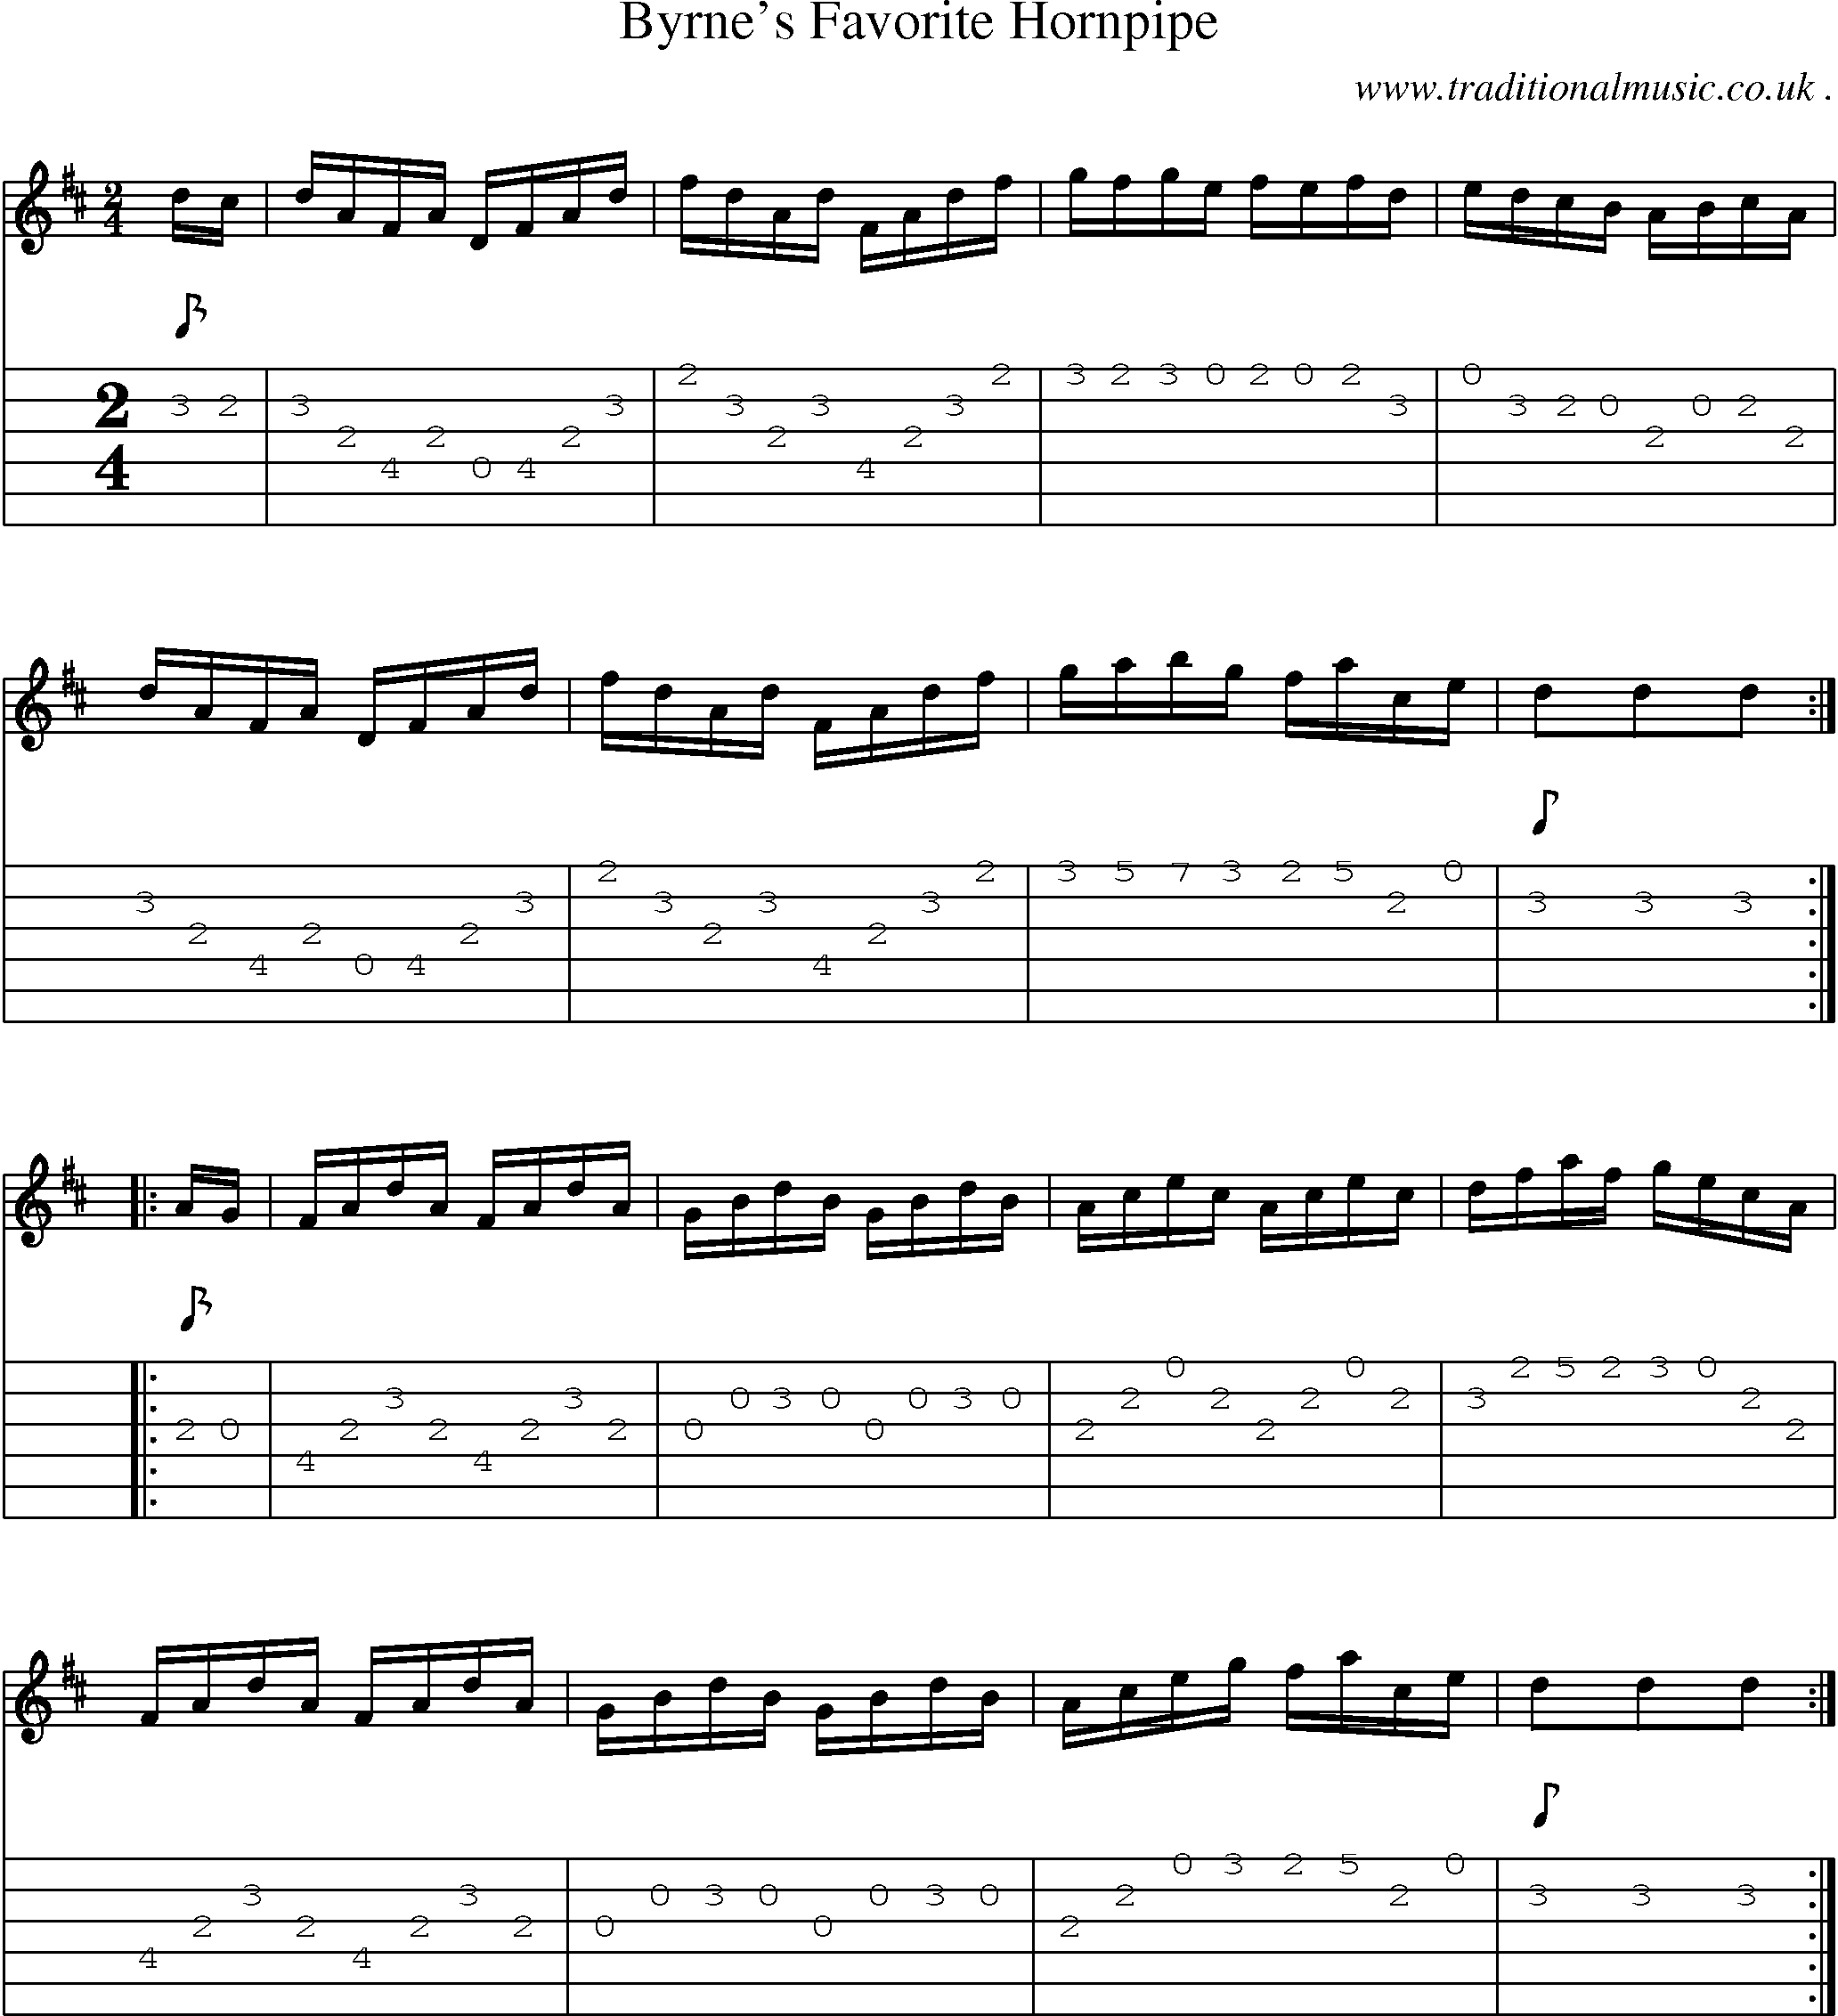 Sheet-Music and Guitar Tabs for Byrnes Favorite Hornpipe